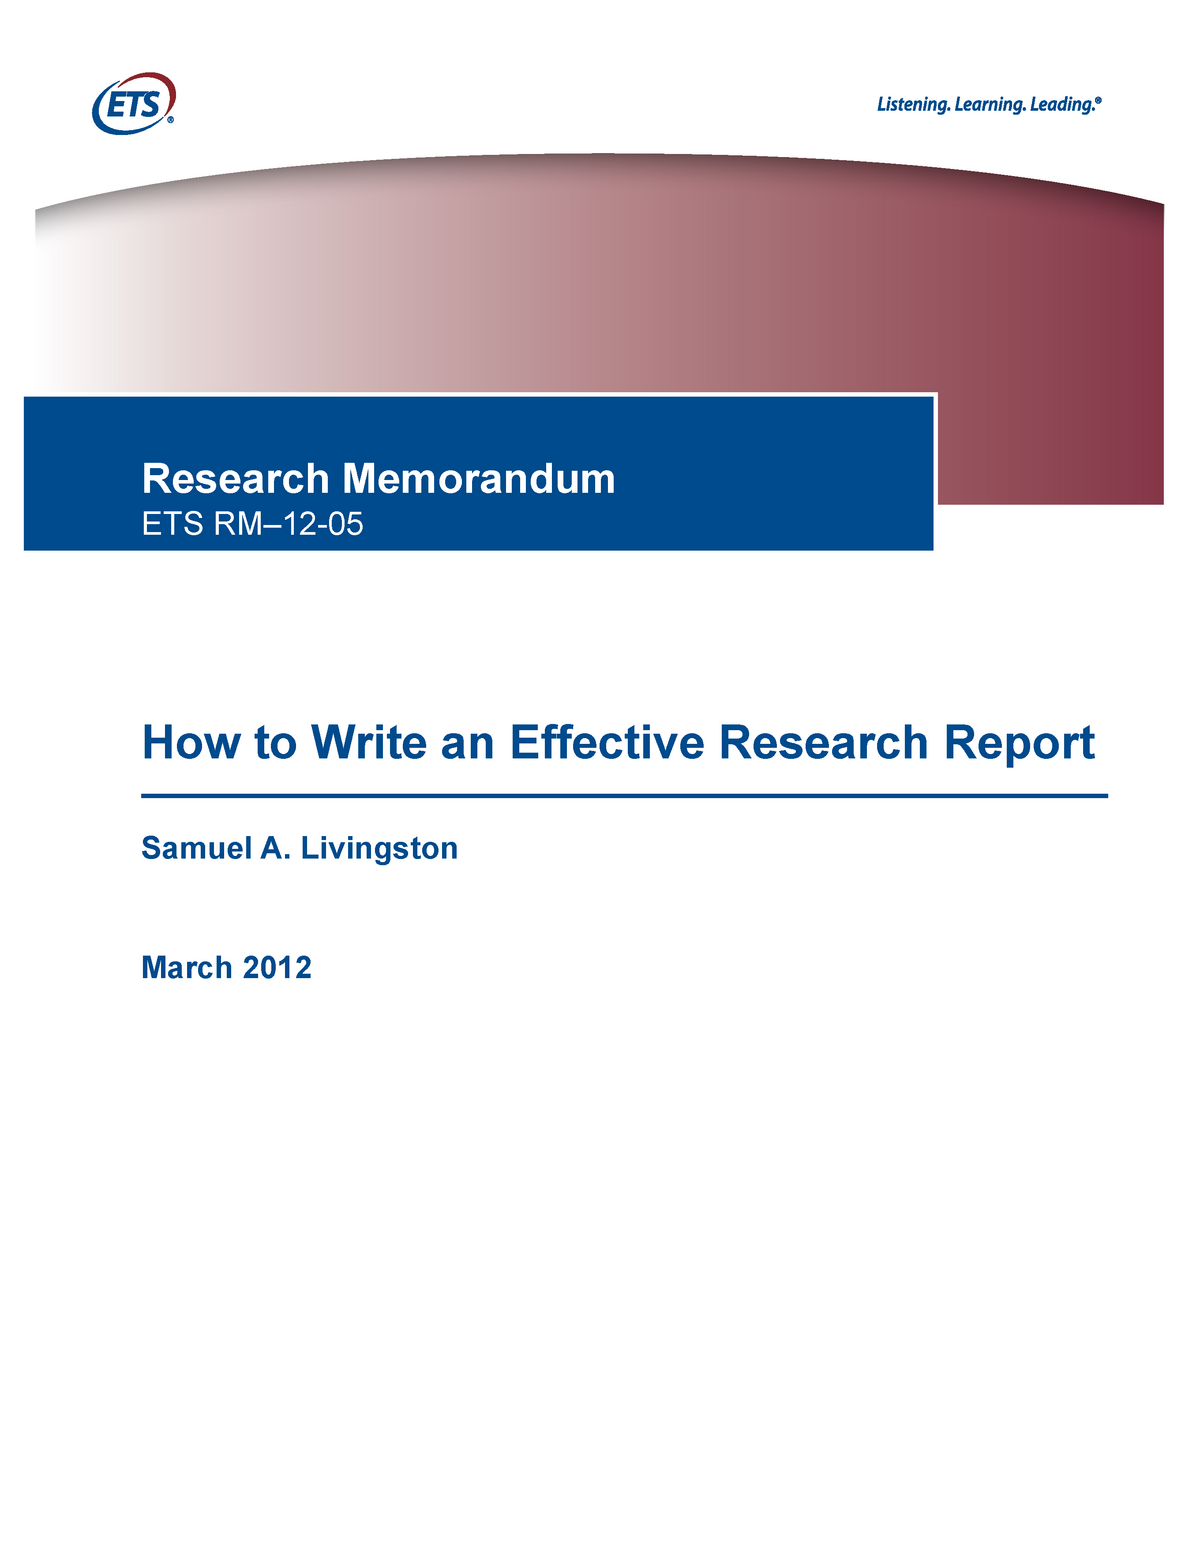 an effective research report must be concise this means